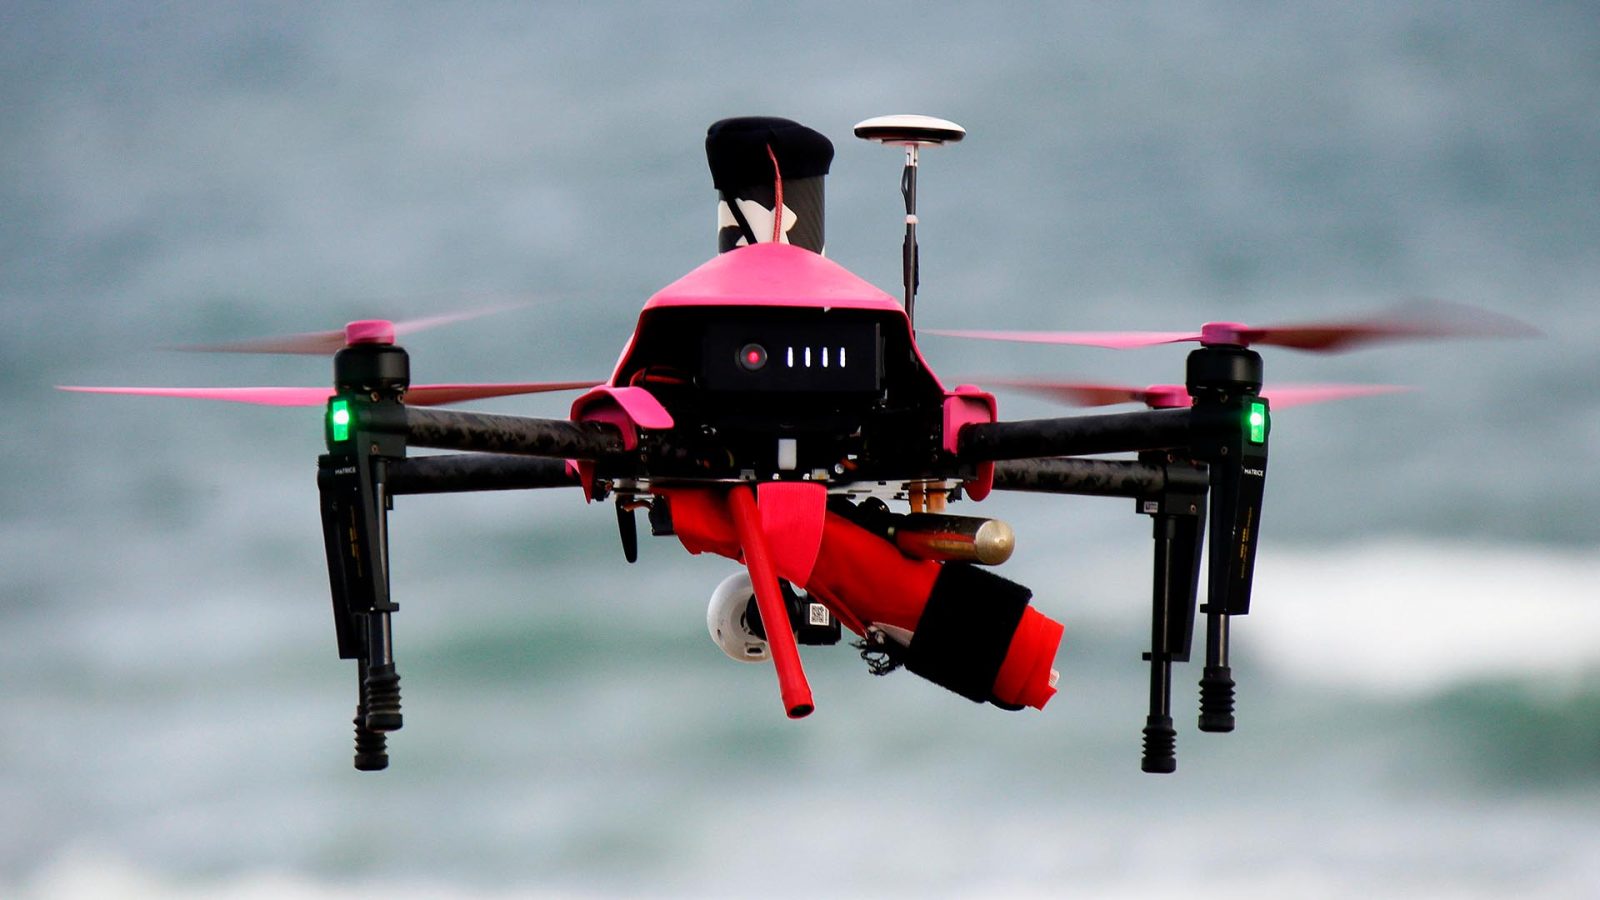 Drones are being tested to help lifeguards save lives